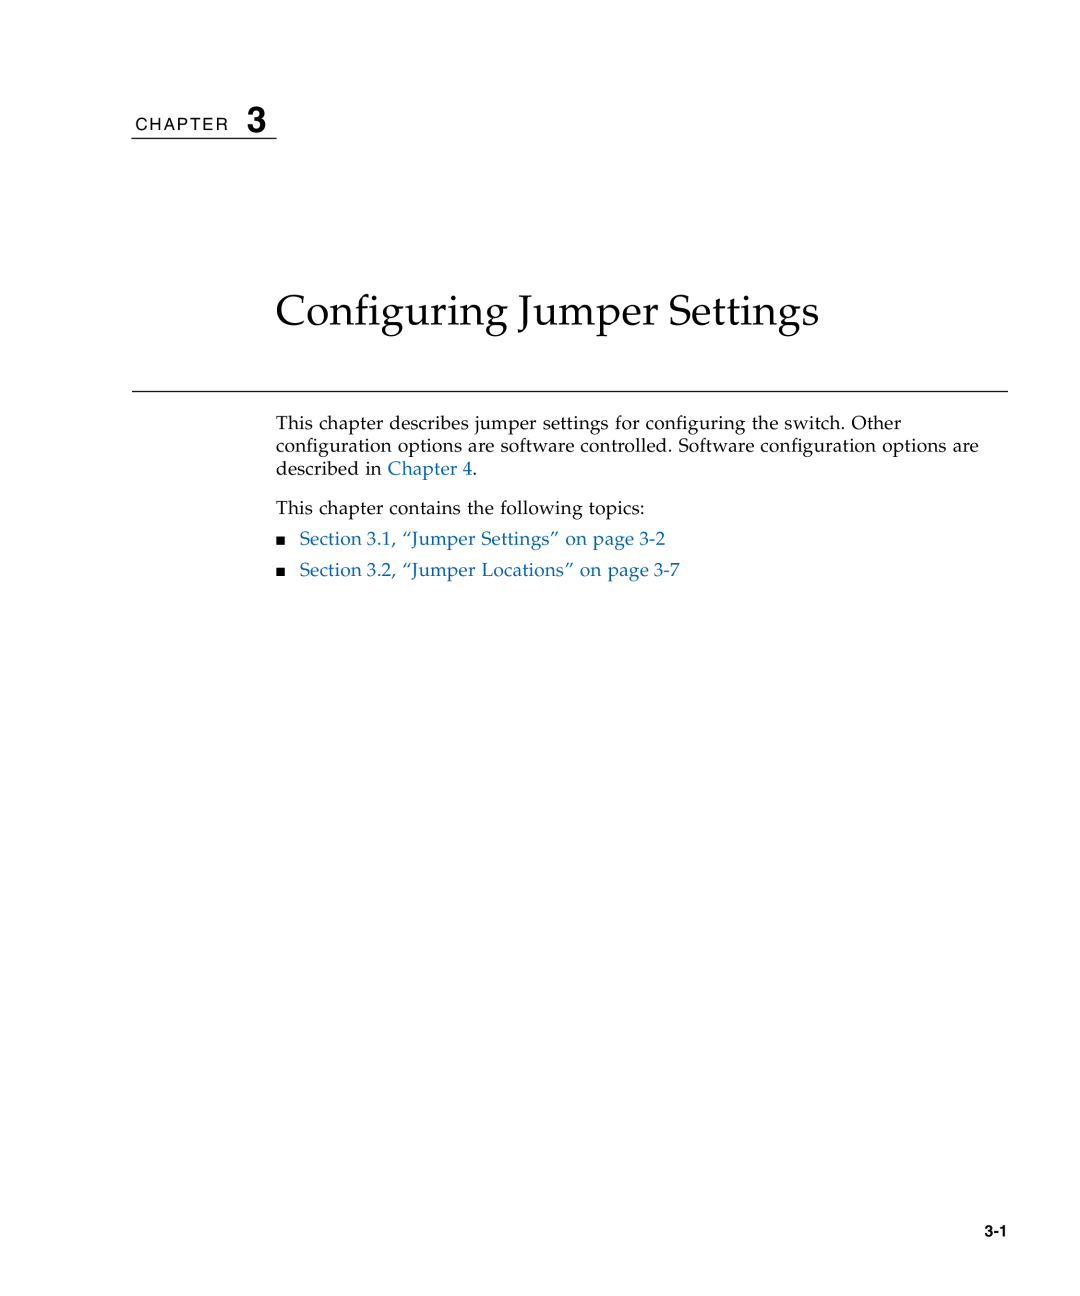 Sun Microsystems CP3240 manual Configuring Jumper Settings, 1, “Jumper Settings” on page, 2, “Jumper Locations” on page 